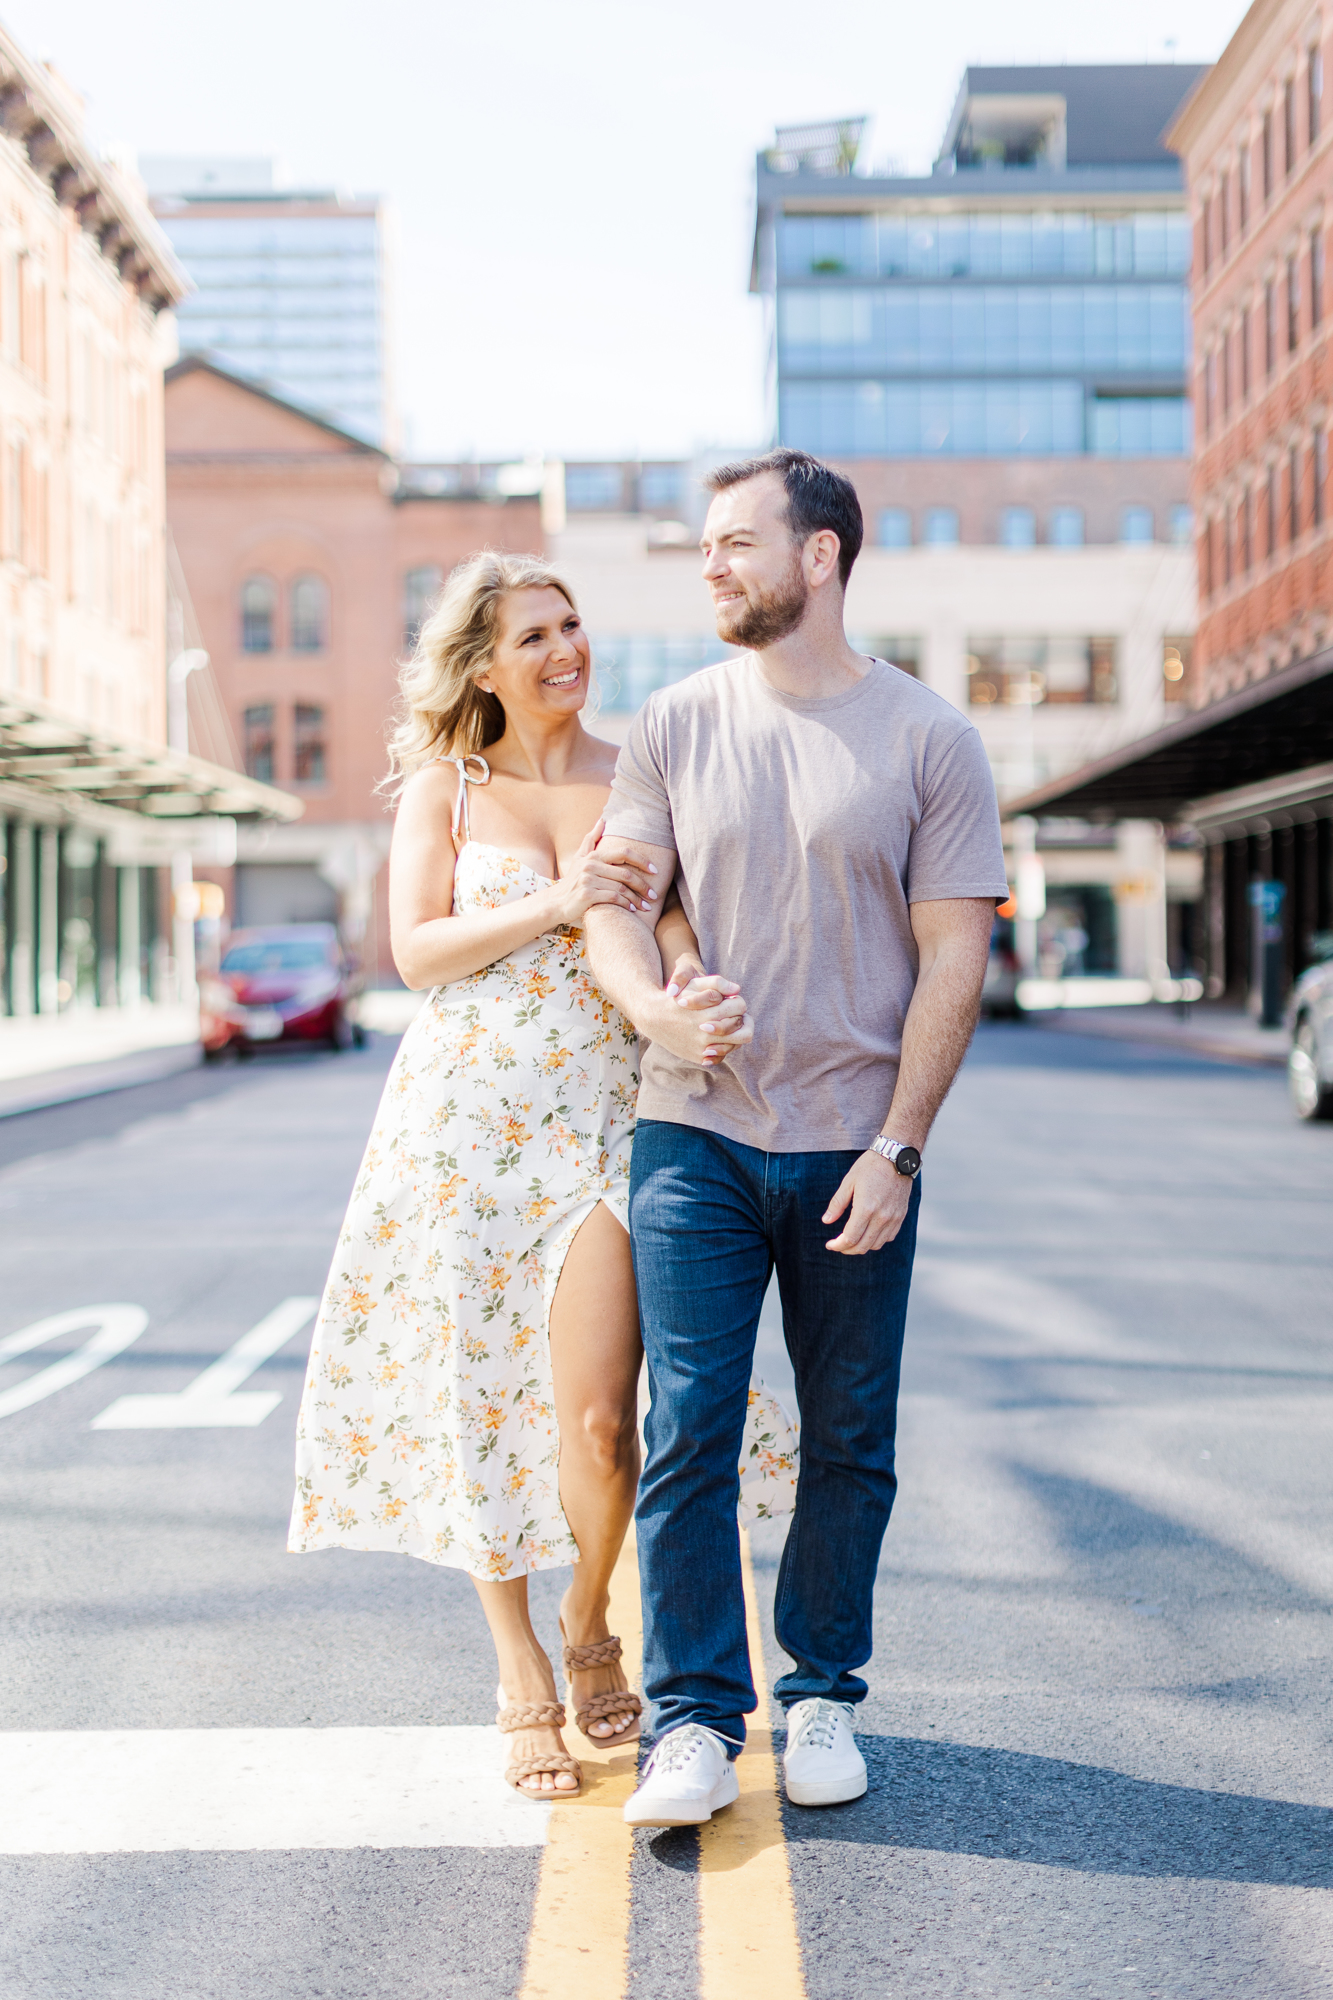 Candid Summer Engagement Shoot on the High Line